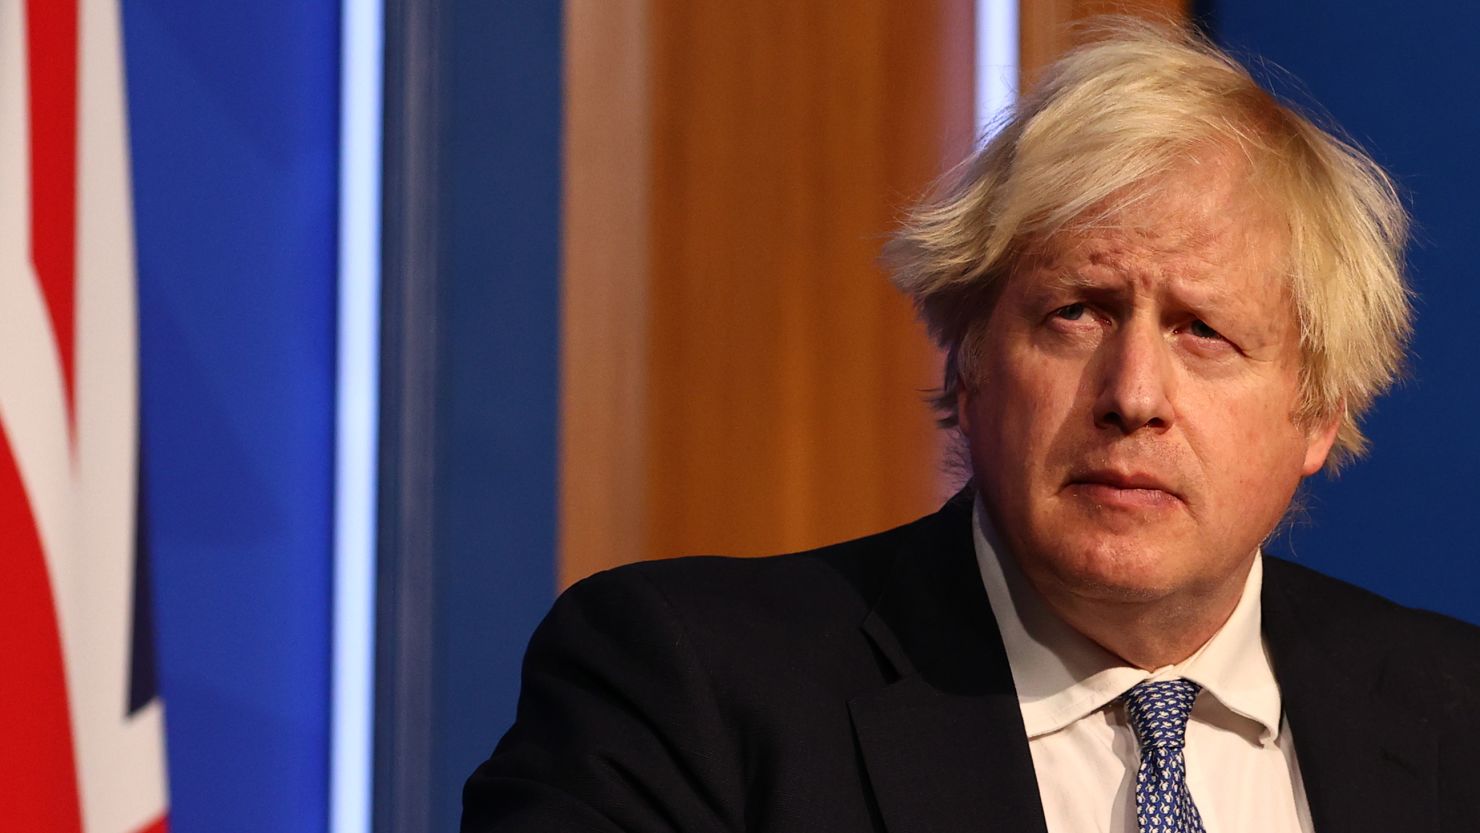 British Prime Minister Boris Johnson is under fire over a series of social gatherings held at Downing Street while the UK was under Covid-19 restrictions. 